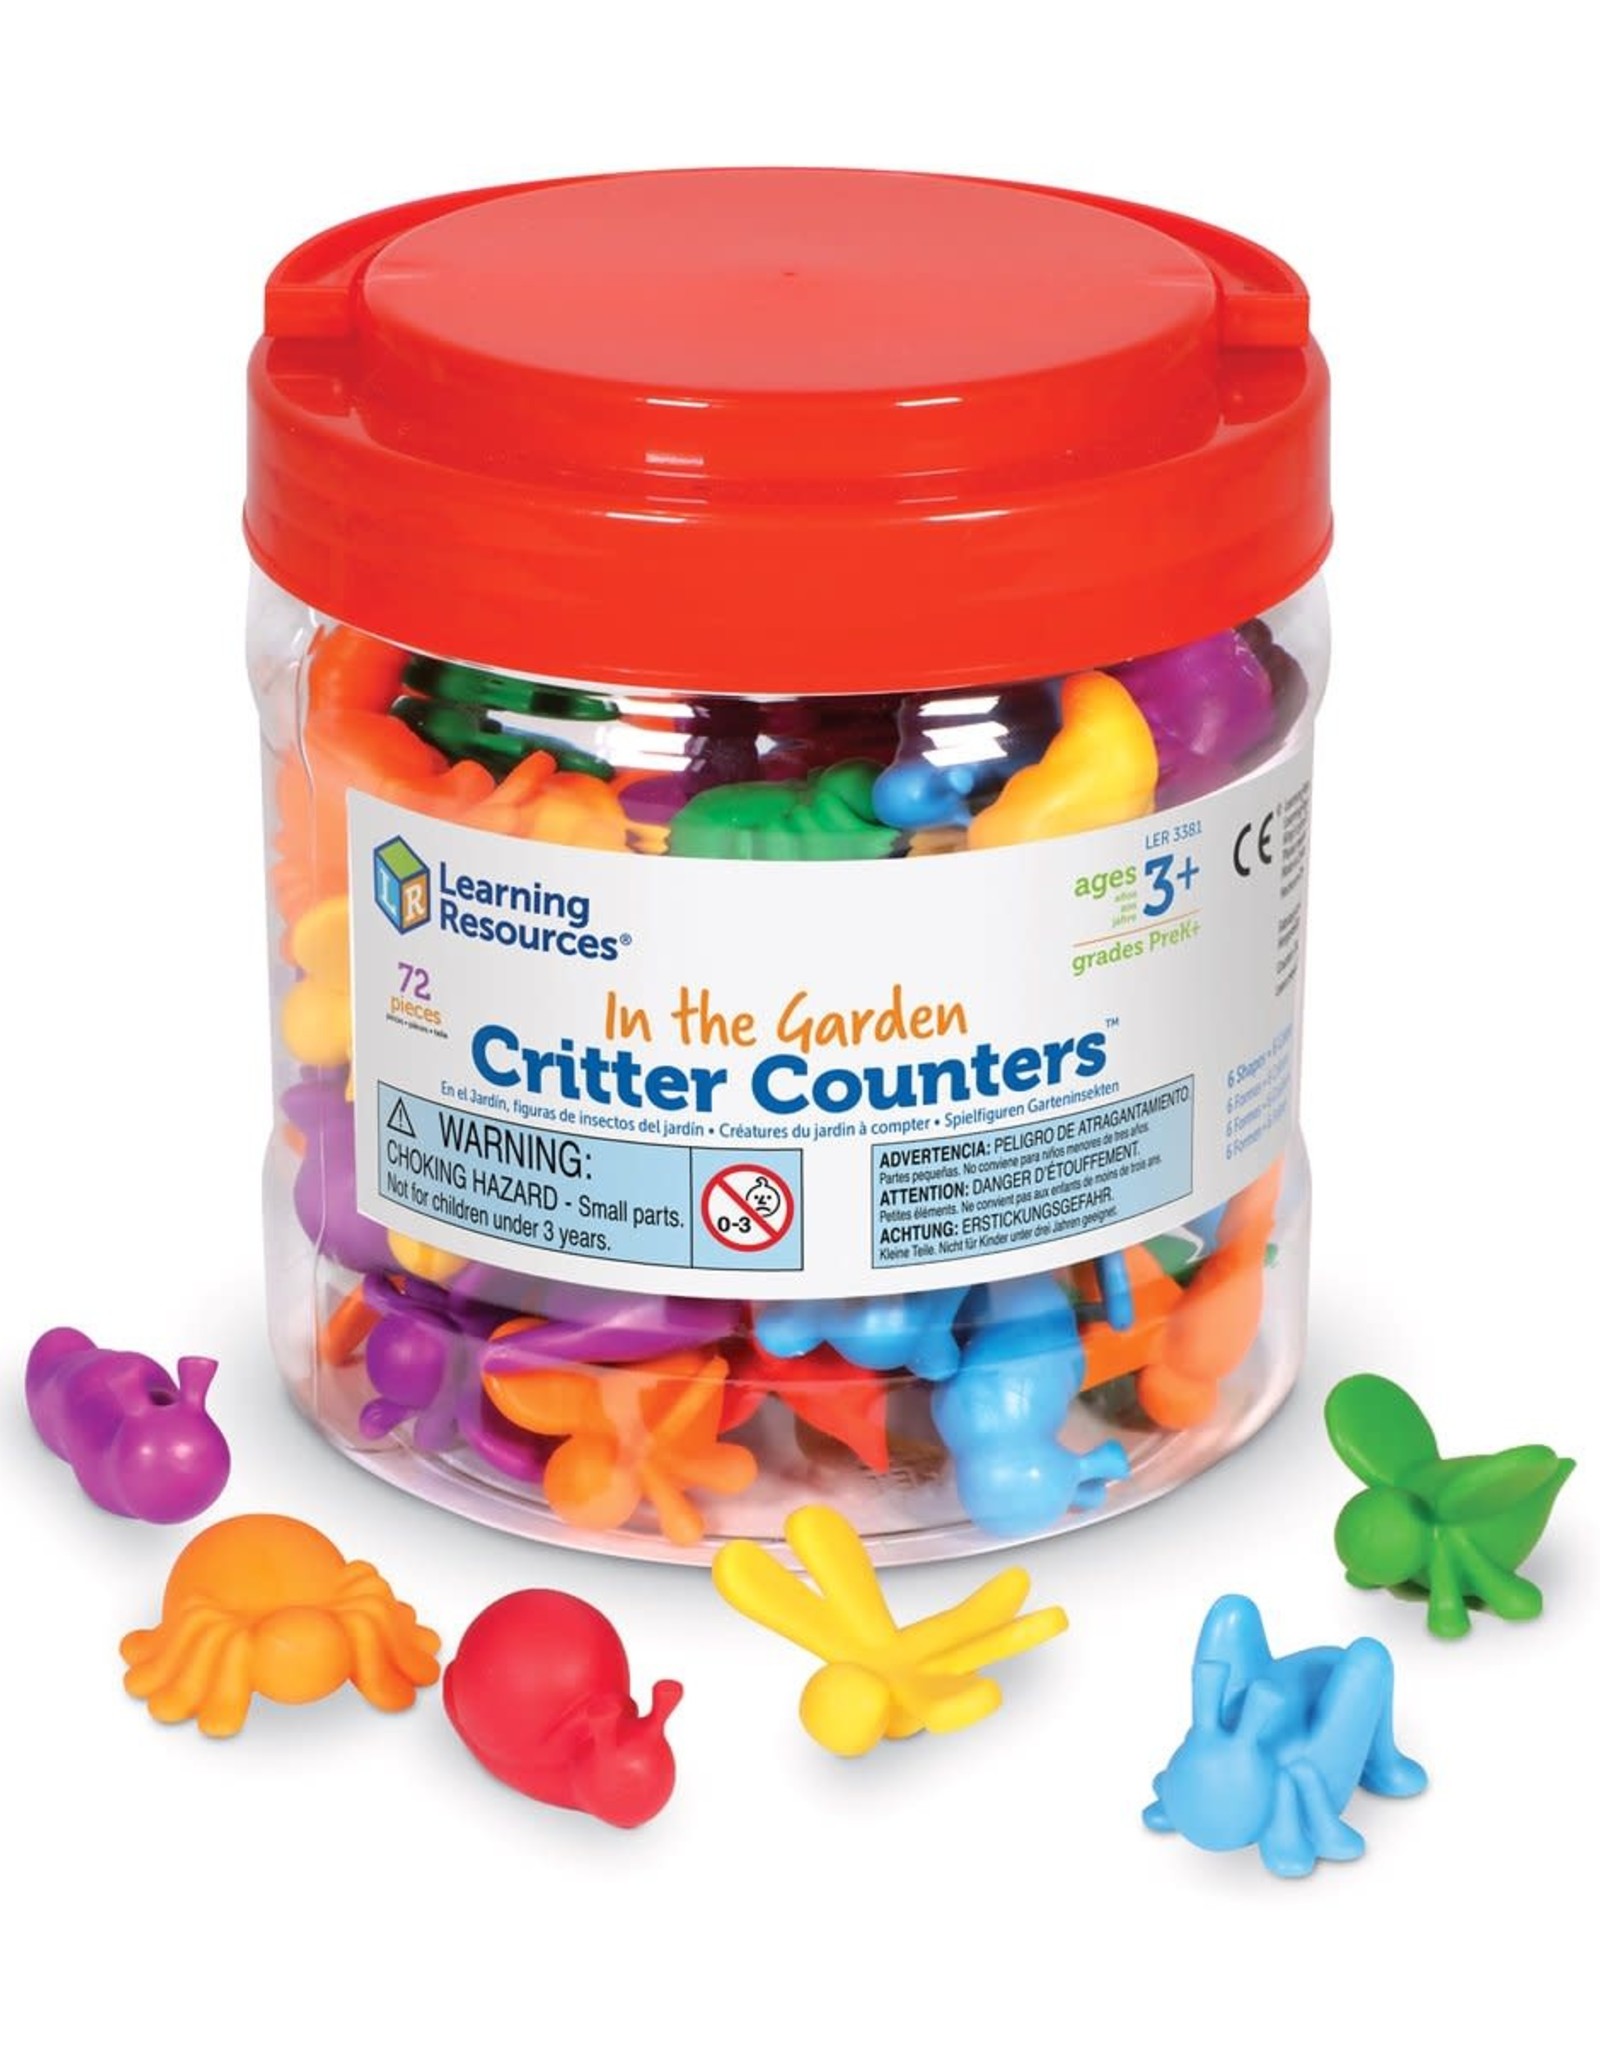 Learning Resources Critter Counters - In the Garden